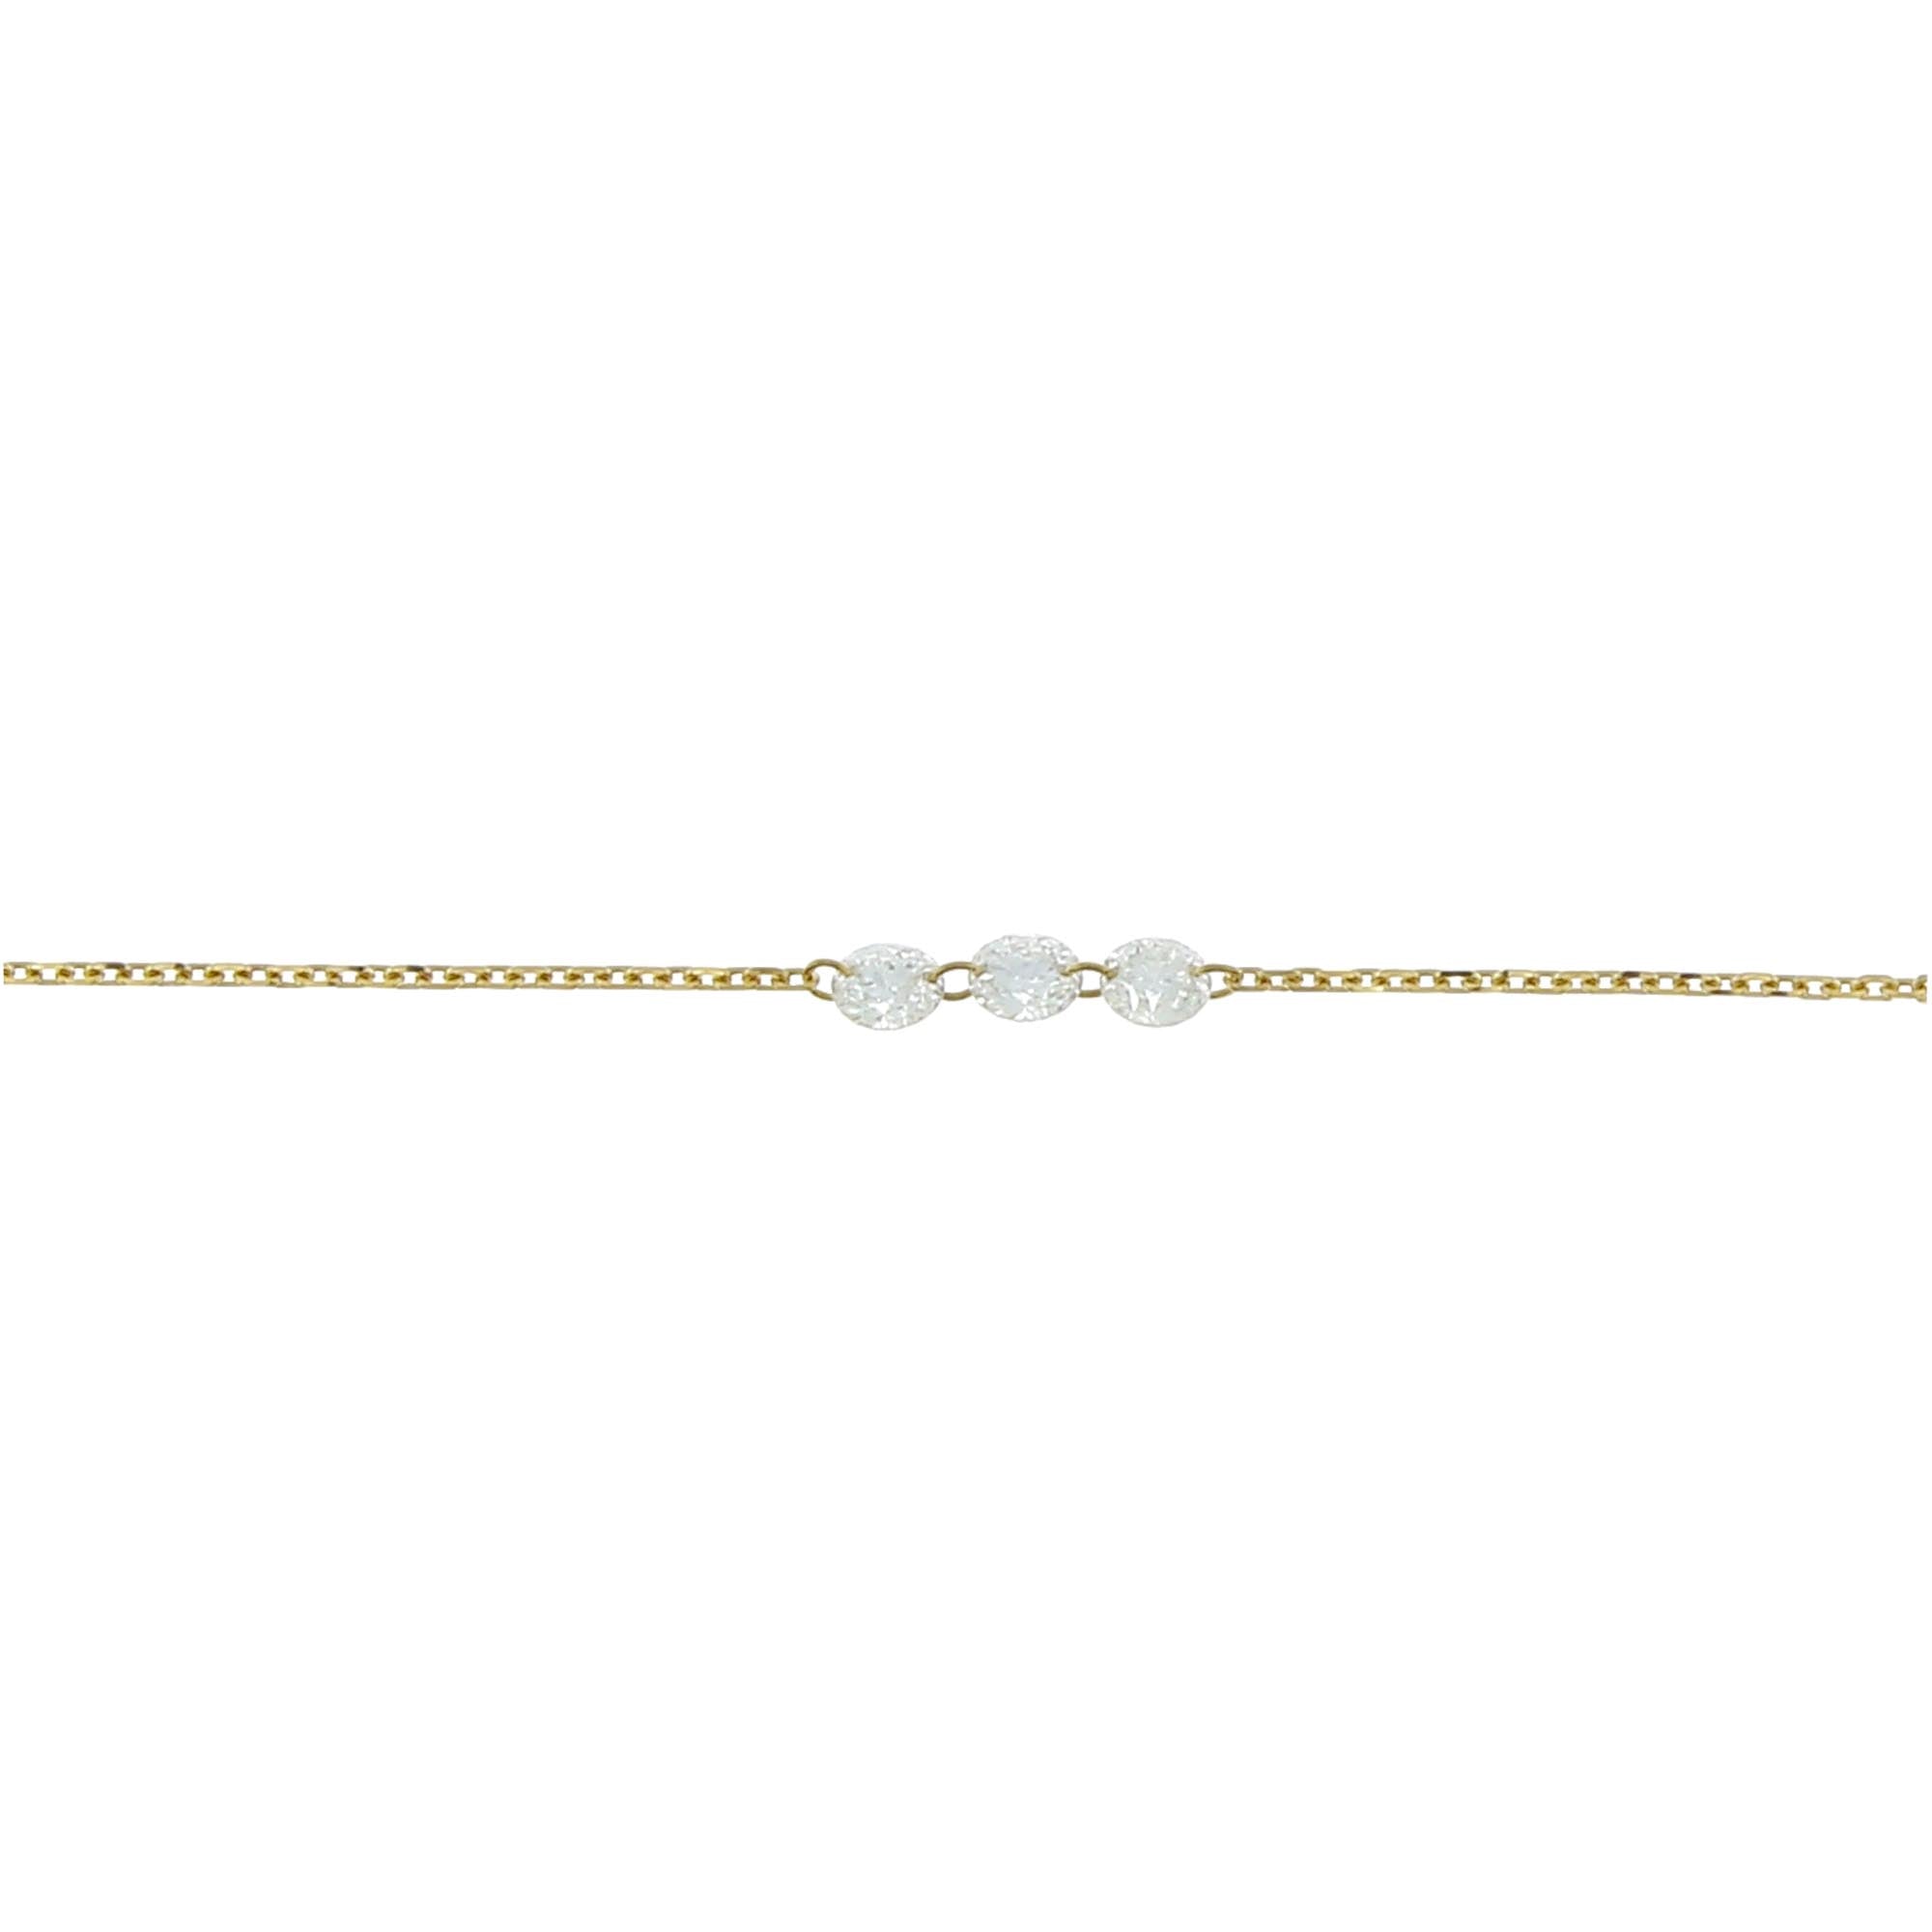 3.5mm Yellow Gold Diamond Encrusted Necklace 